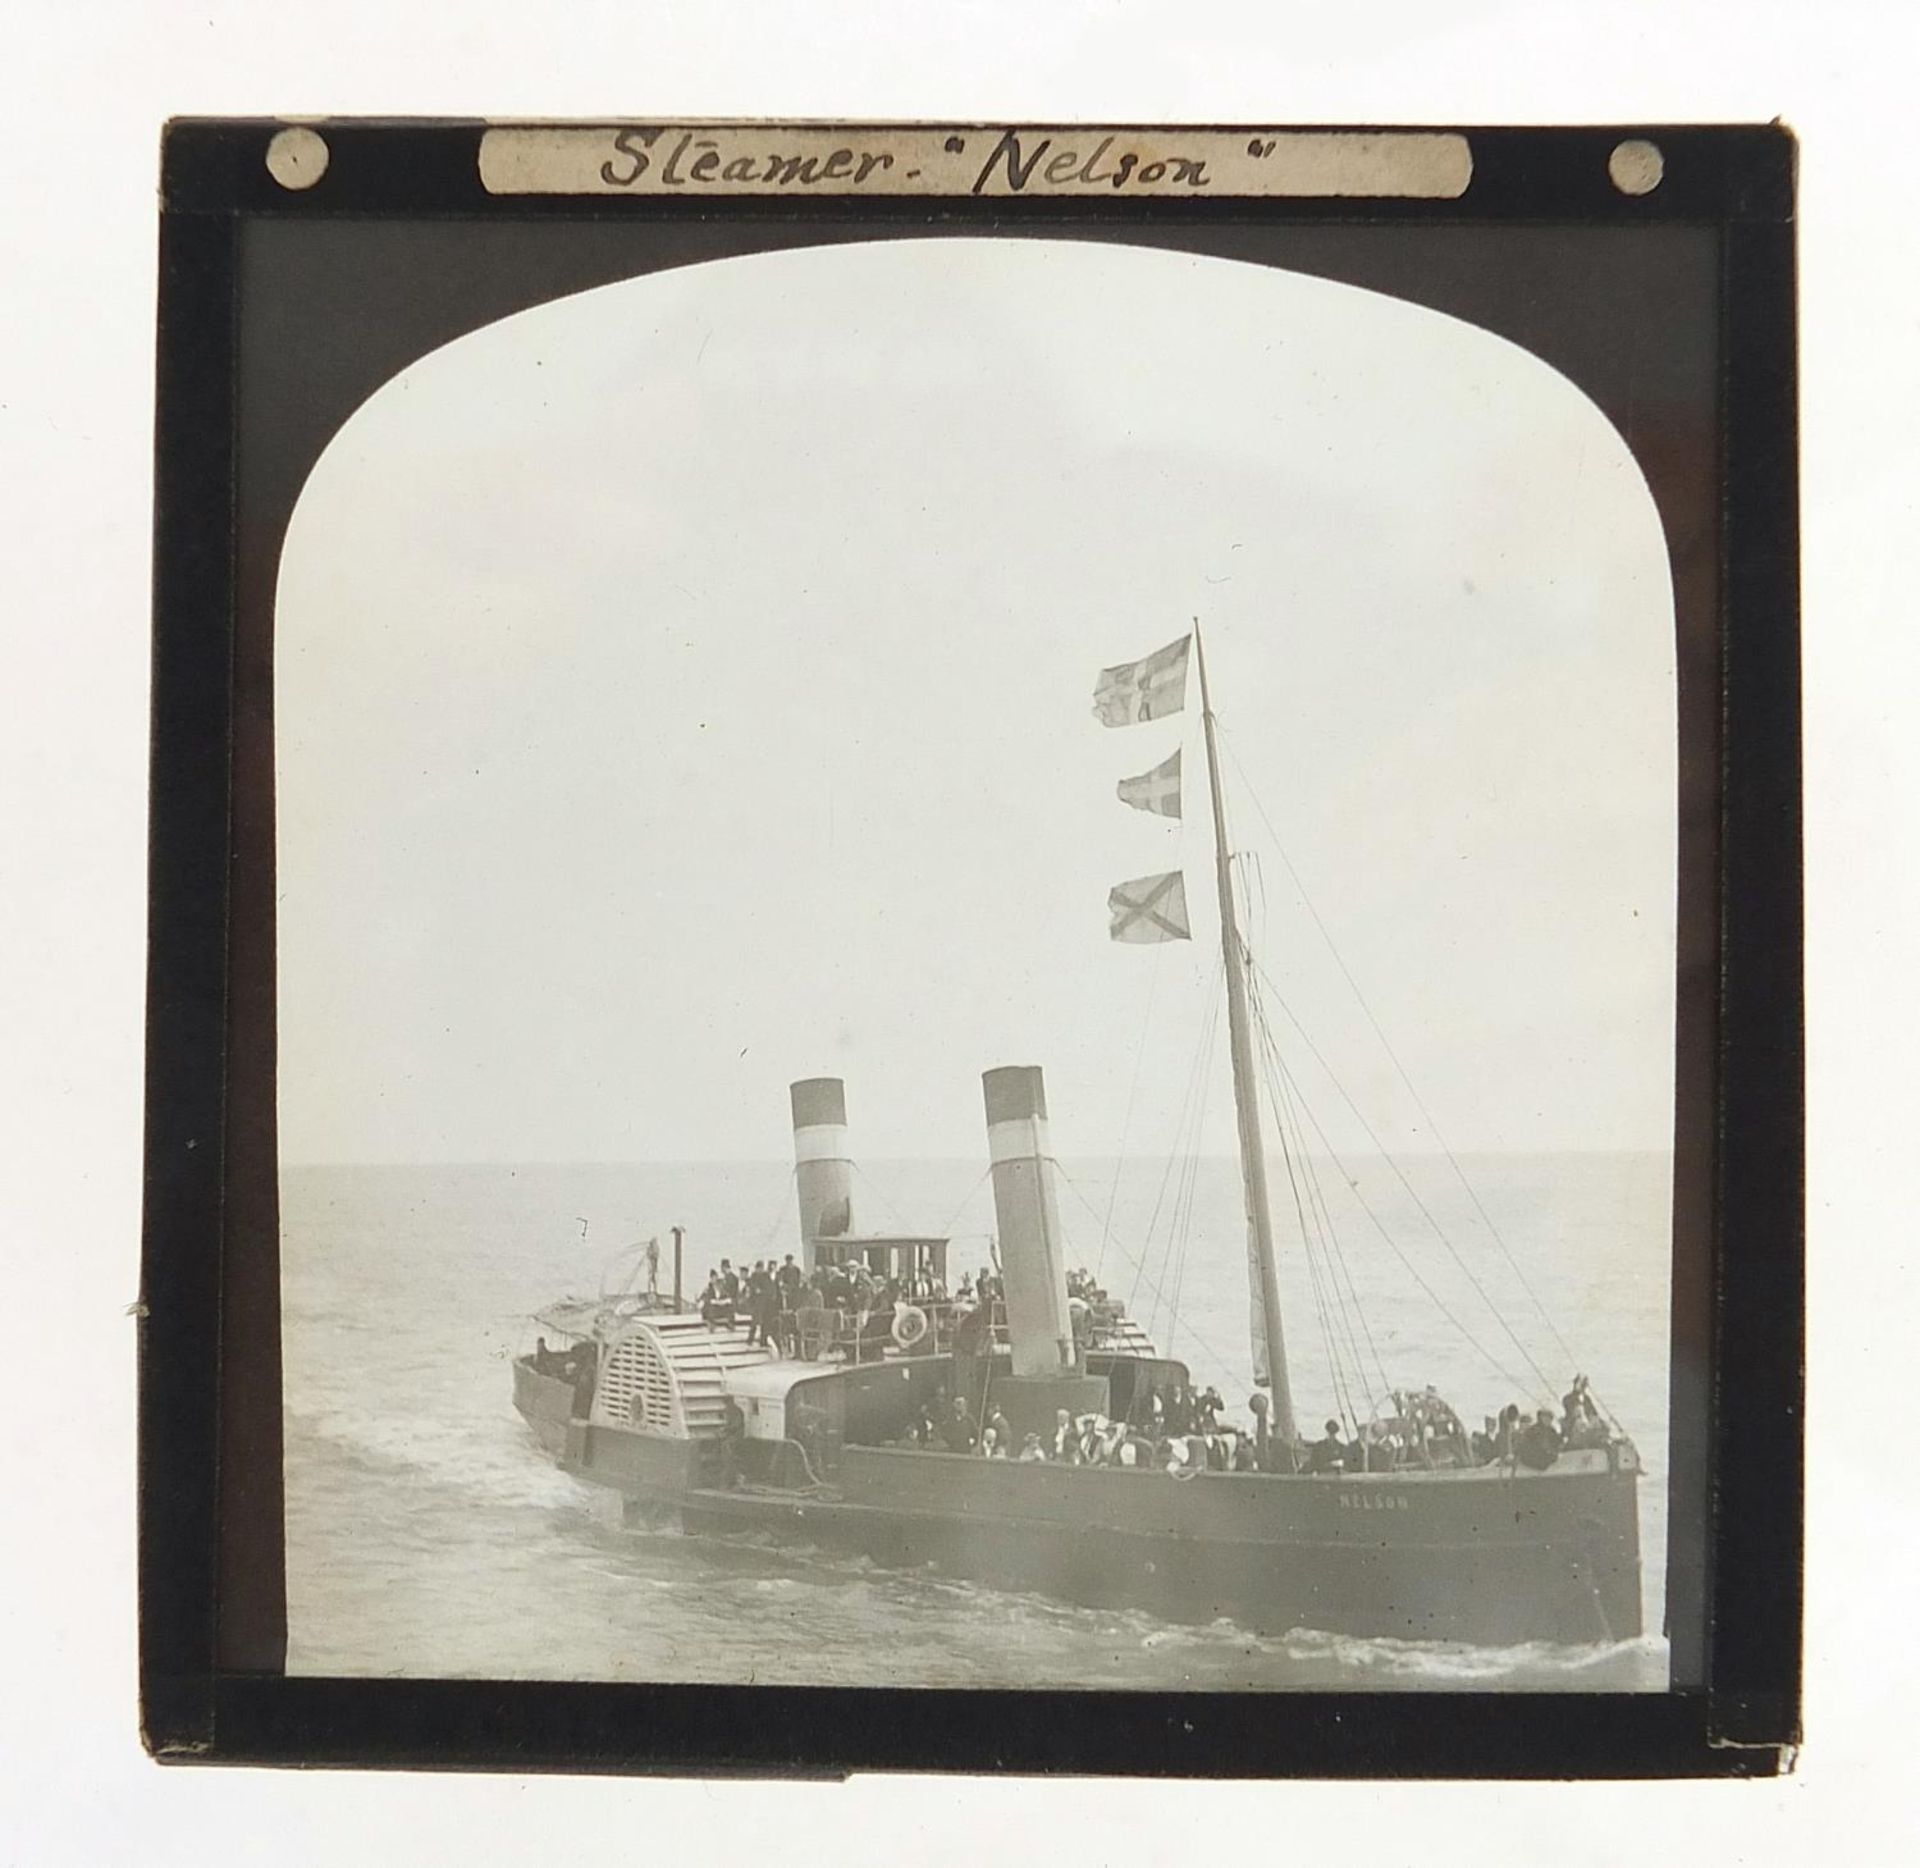 Collection of photographic slides, some ships including HMS Victory, Steamer Nelson and Brighton - Image 6 of 8